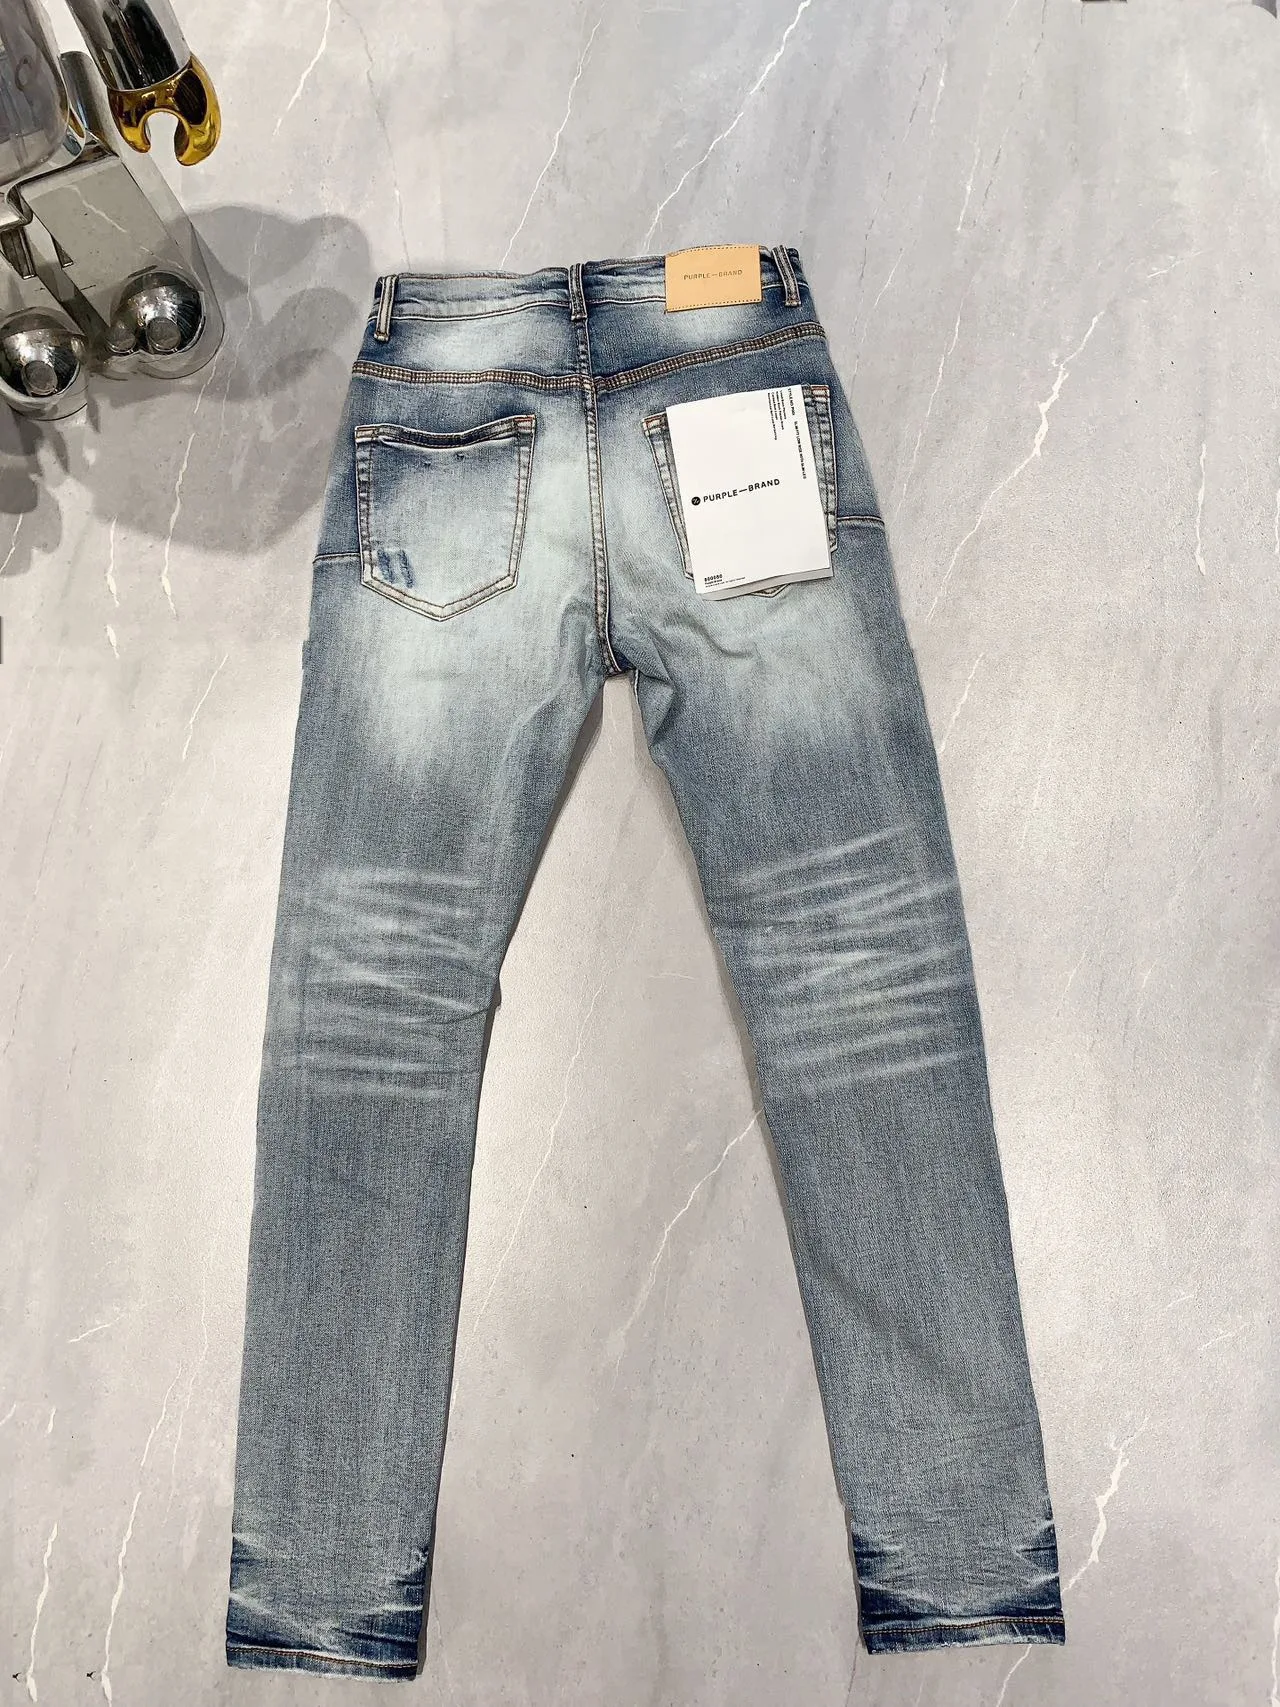 

Purple Brand jeans denim pants with fashion high quality repair low raise skinny denim patches 1:1 28-40 size pants